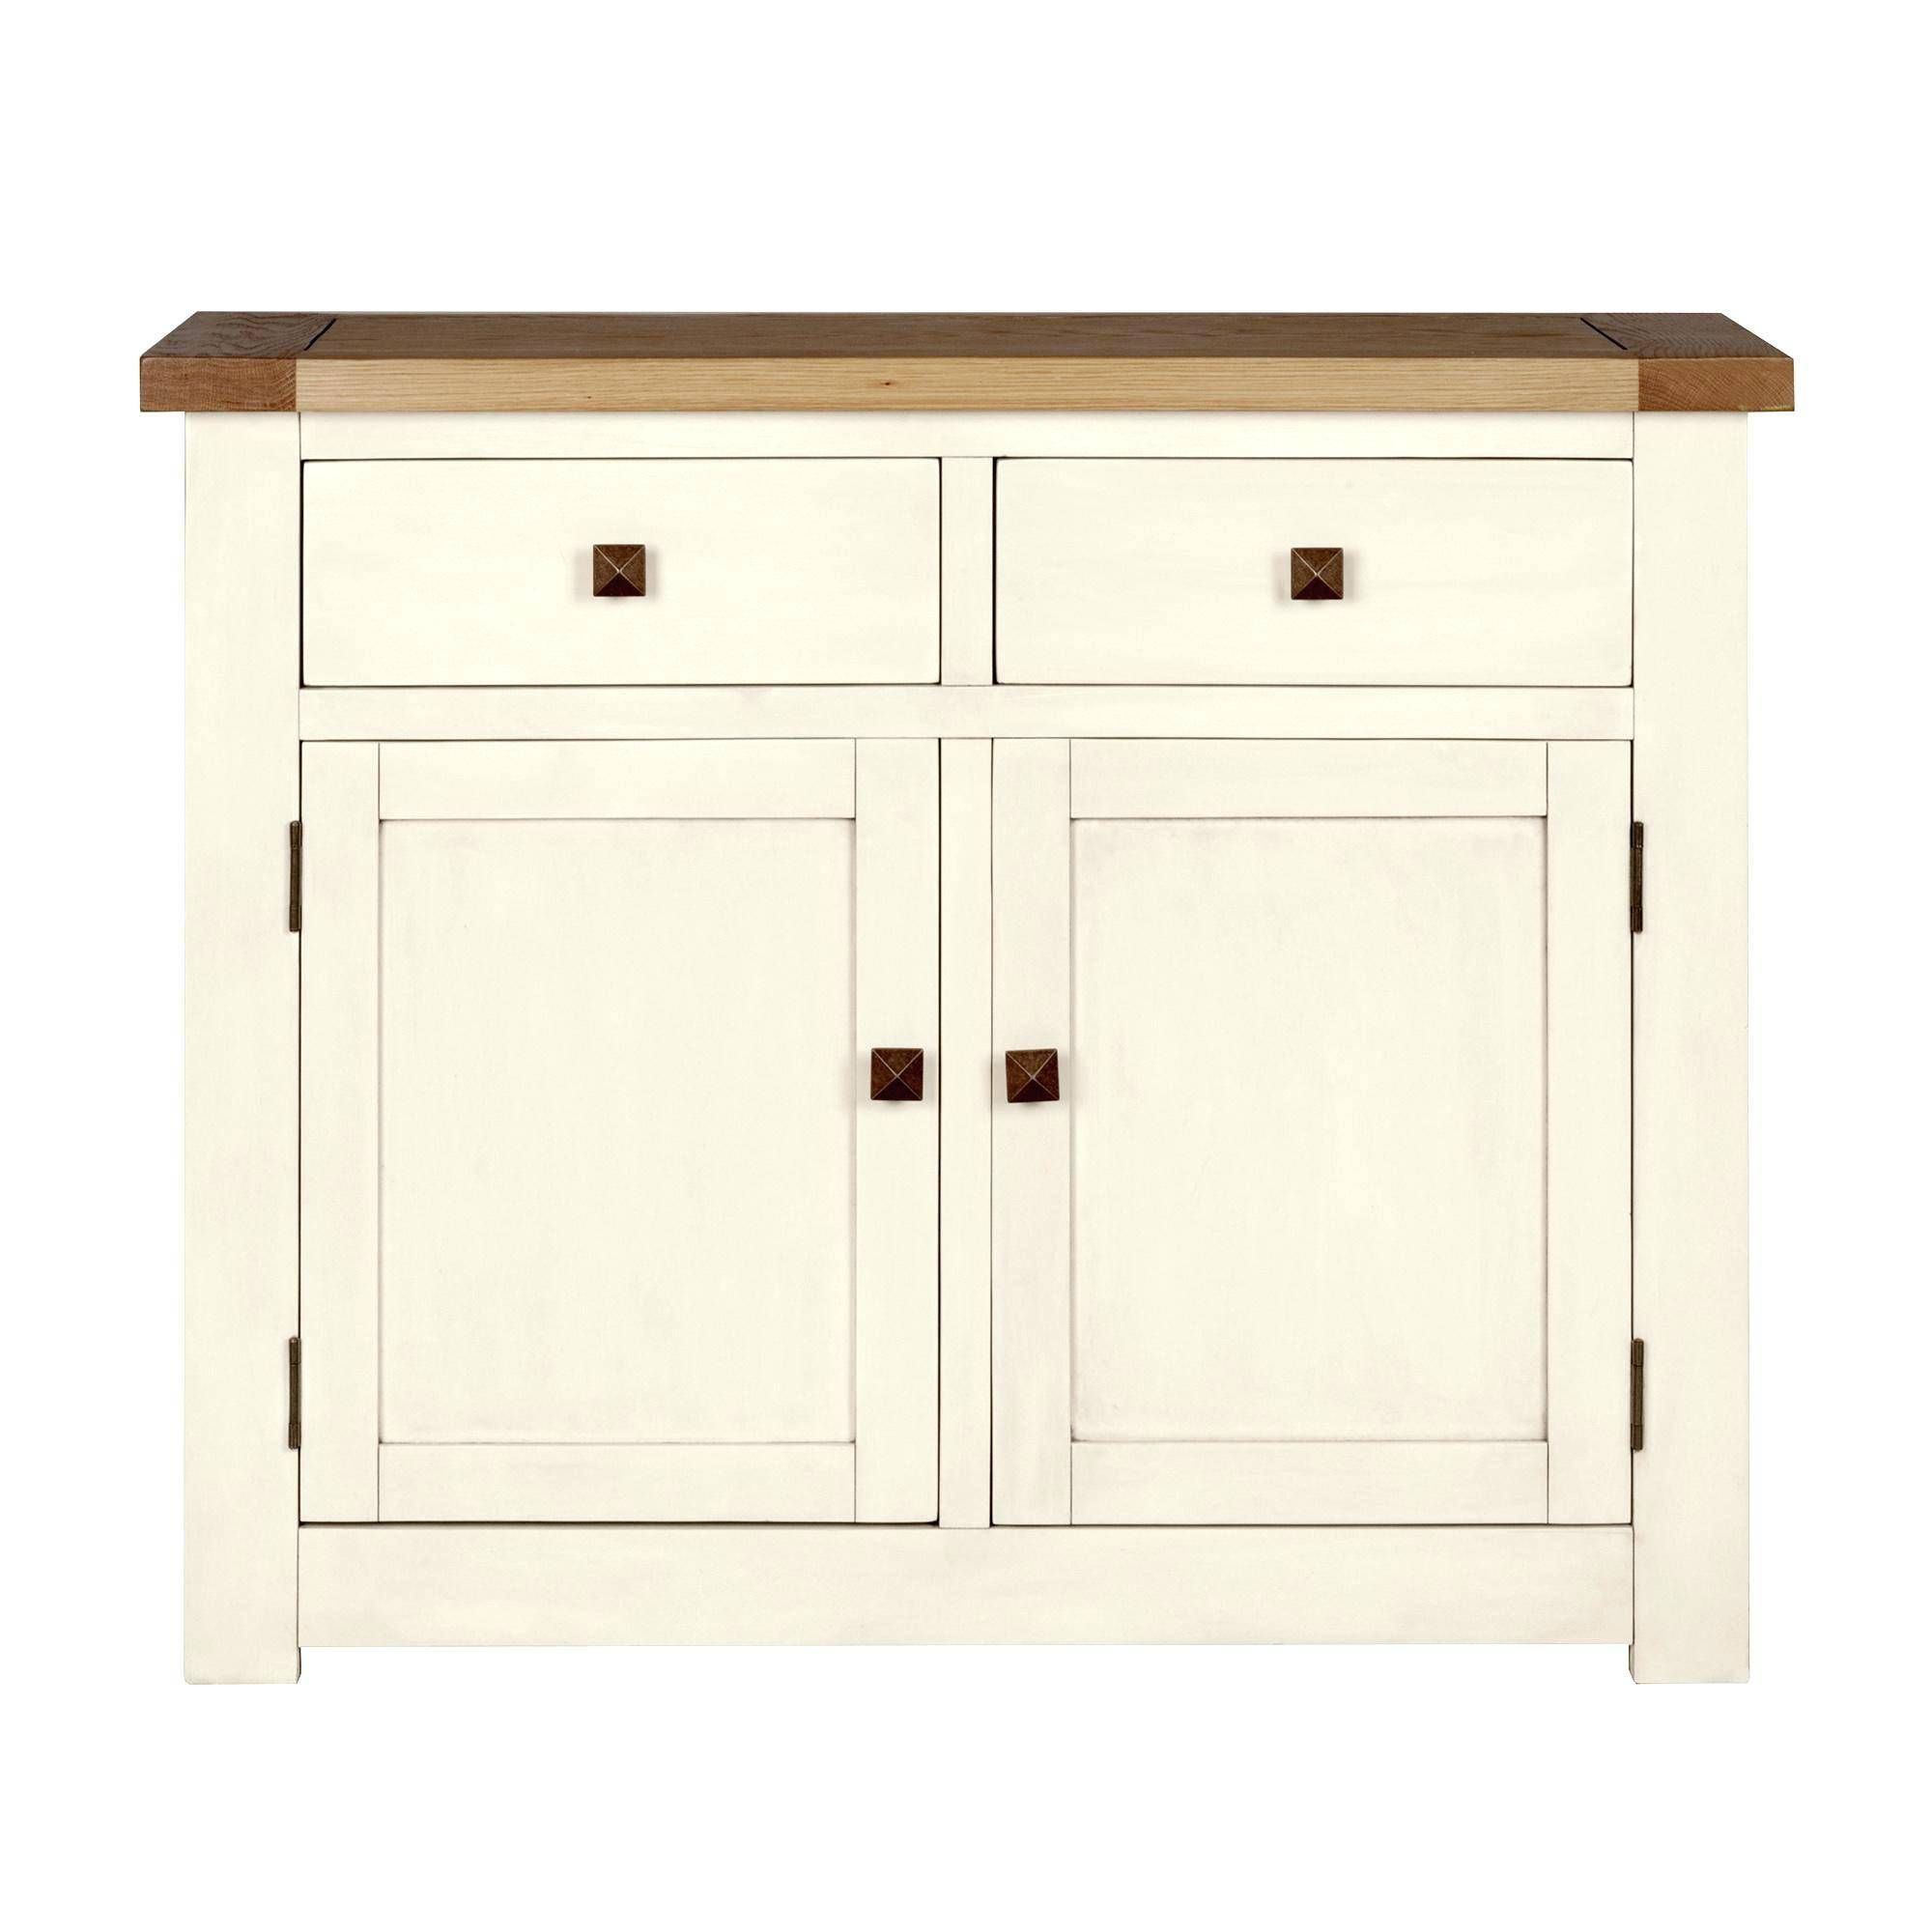 Cream Sideboards Cream Sideboard Sideboards Cream And Oak – Soops (View 10 of 15)